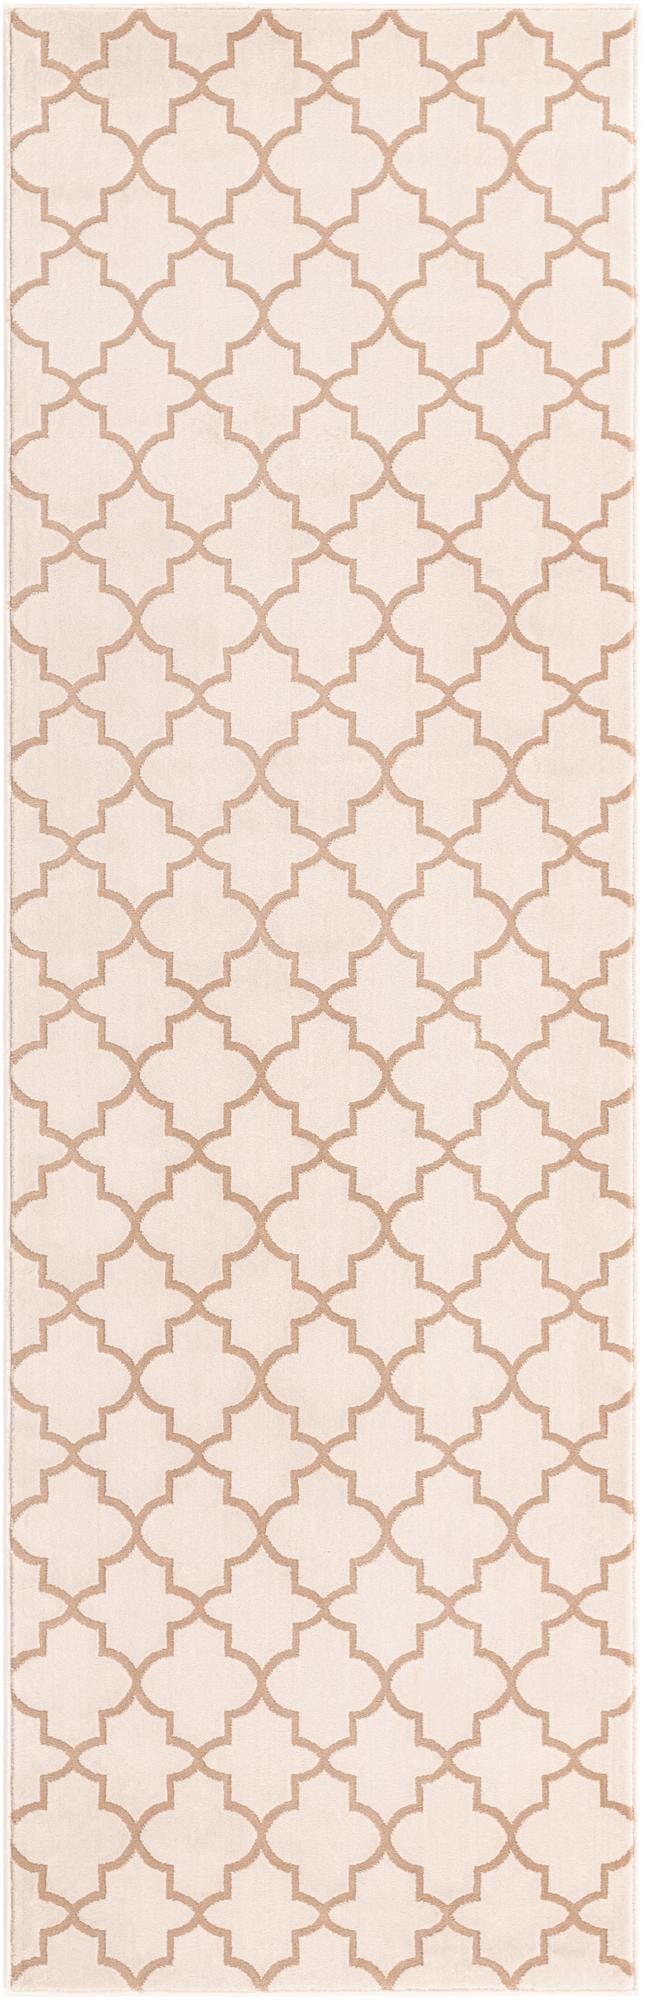 Lincoln Center Indoor Rug - White